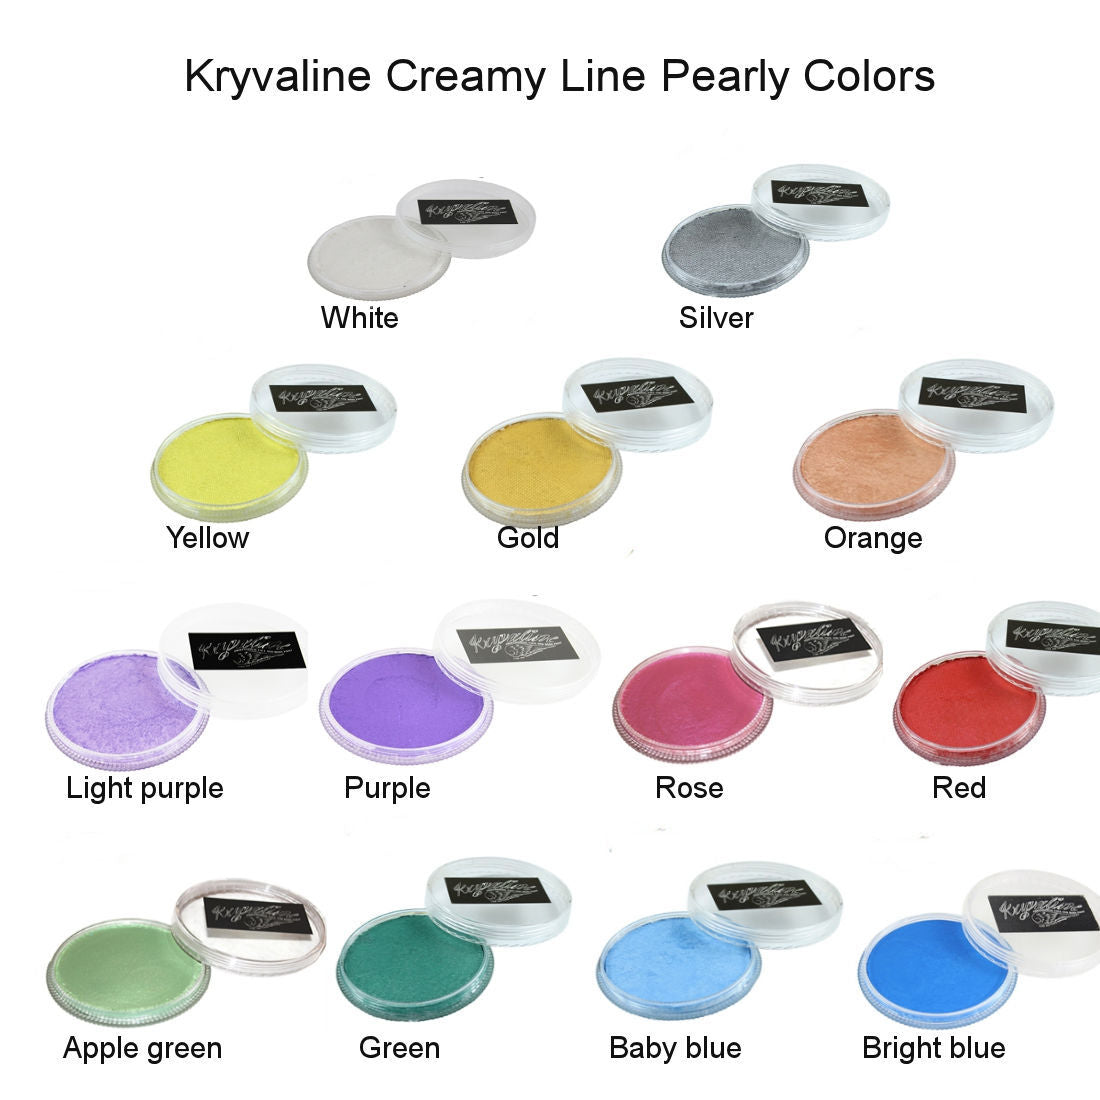 Kryvaline Face and body Paint Pearly Colors 30g Bright Blue - Kryvaline Body Art Makeup | Glitter Tattoos, Face & Body Paint, Design - Kryvaline Body Art Makeup